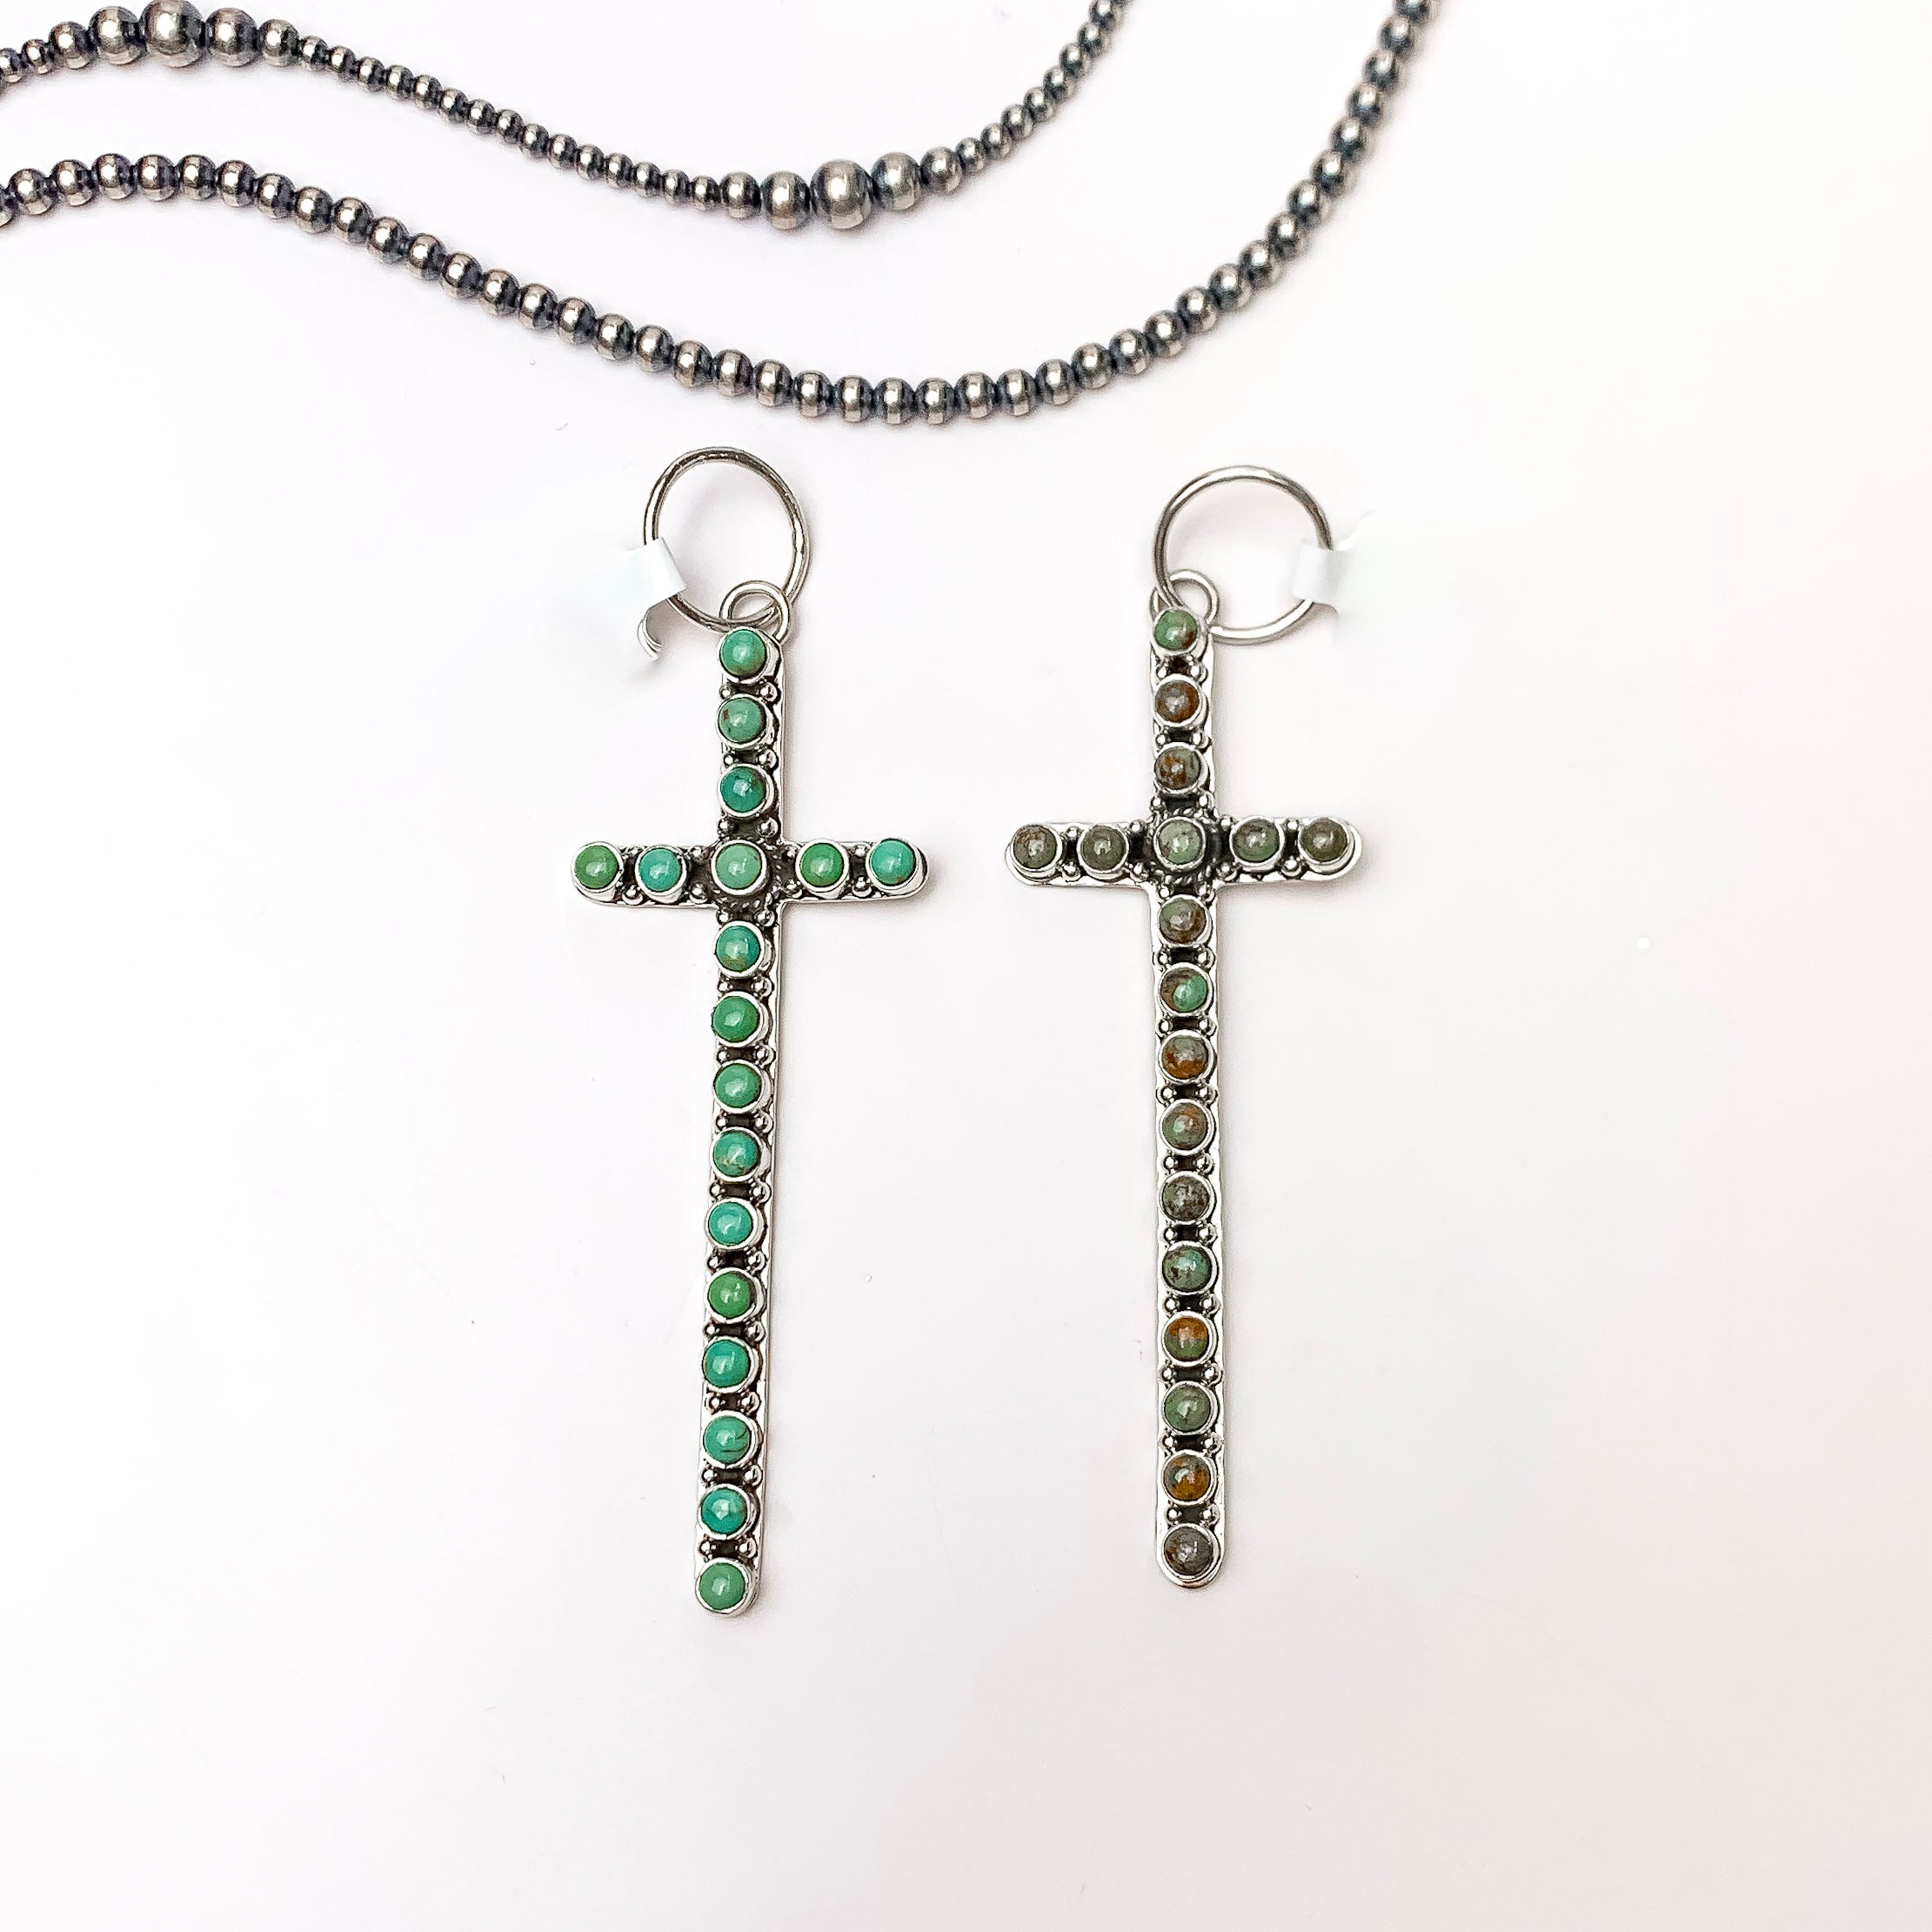 In the picture are sterling silver cross pendants in a kingman turquoise color with a white background